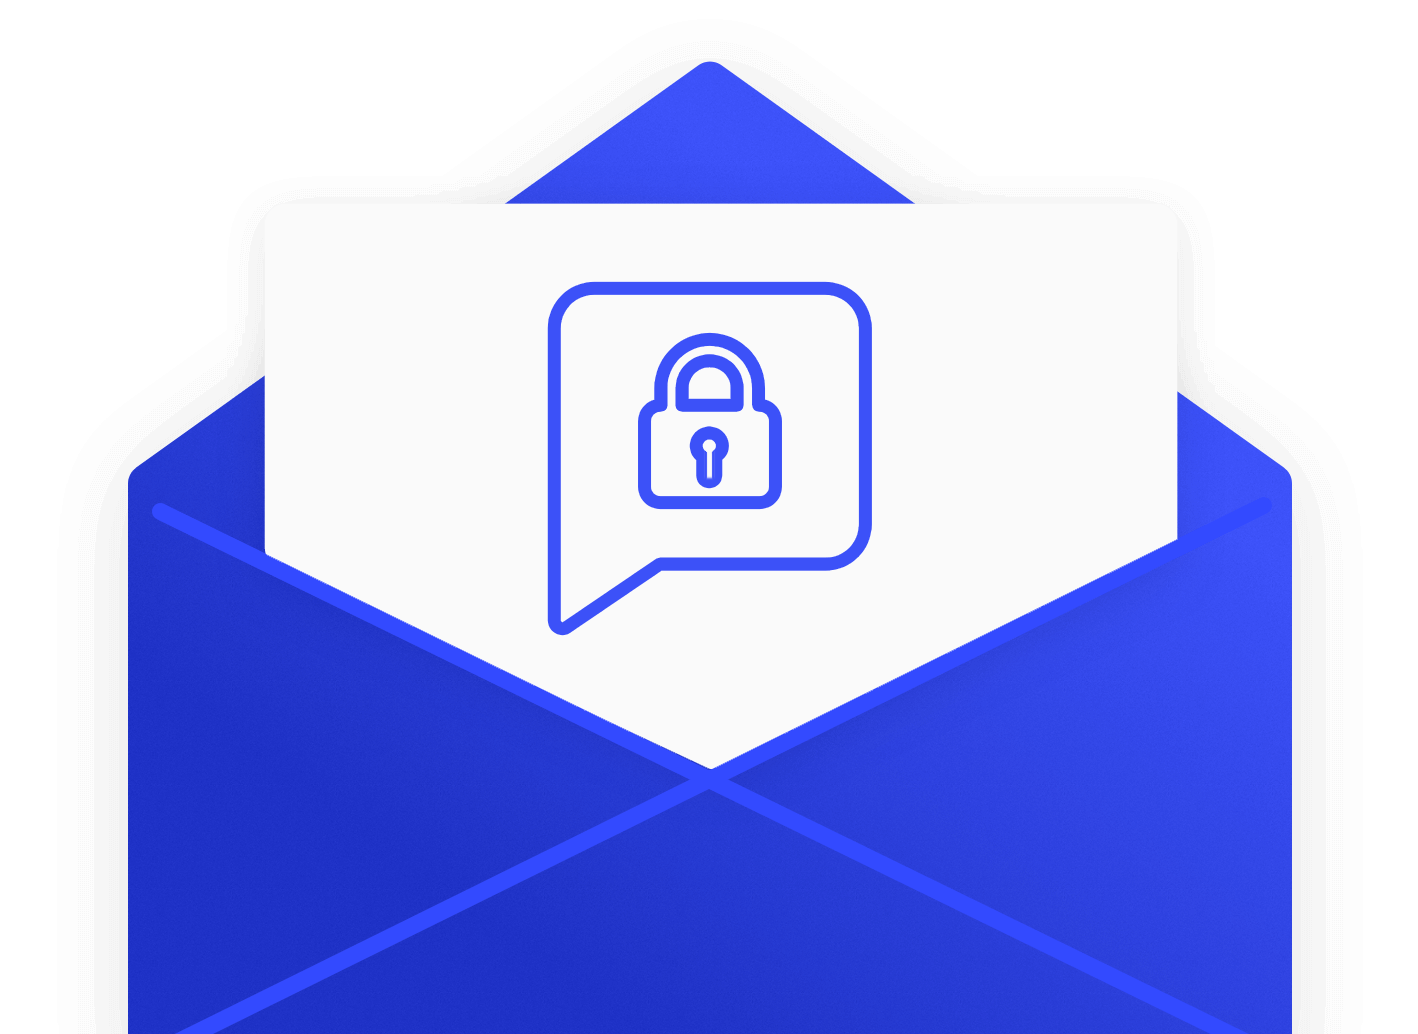 Email Message Privacy Hero